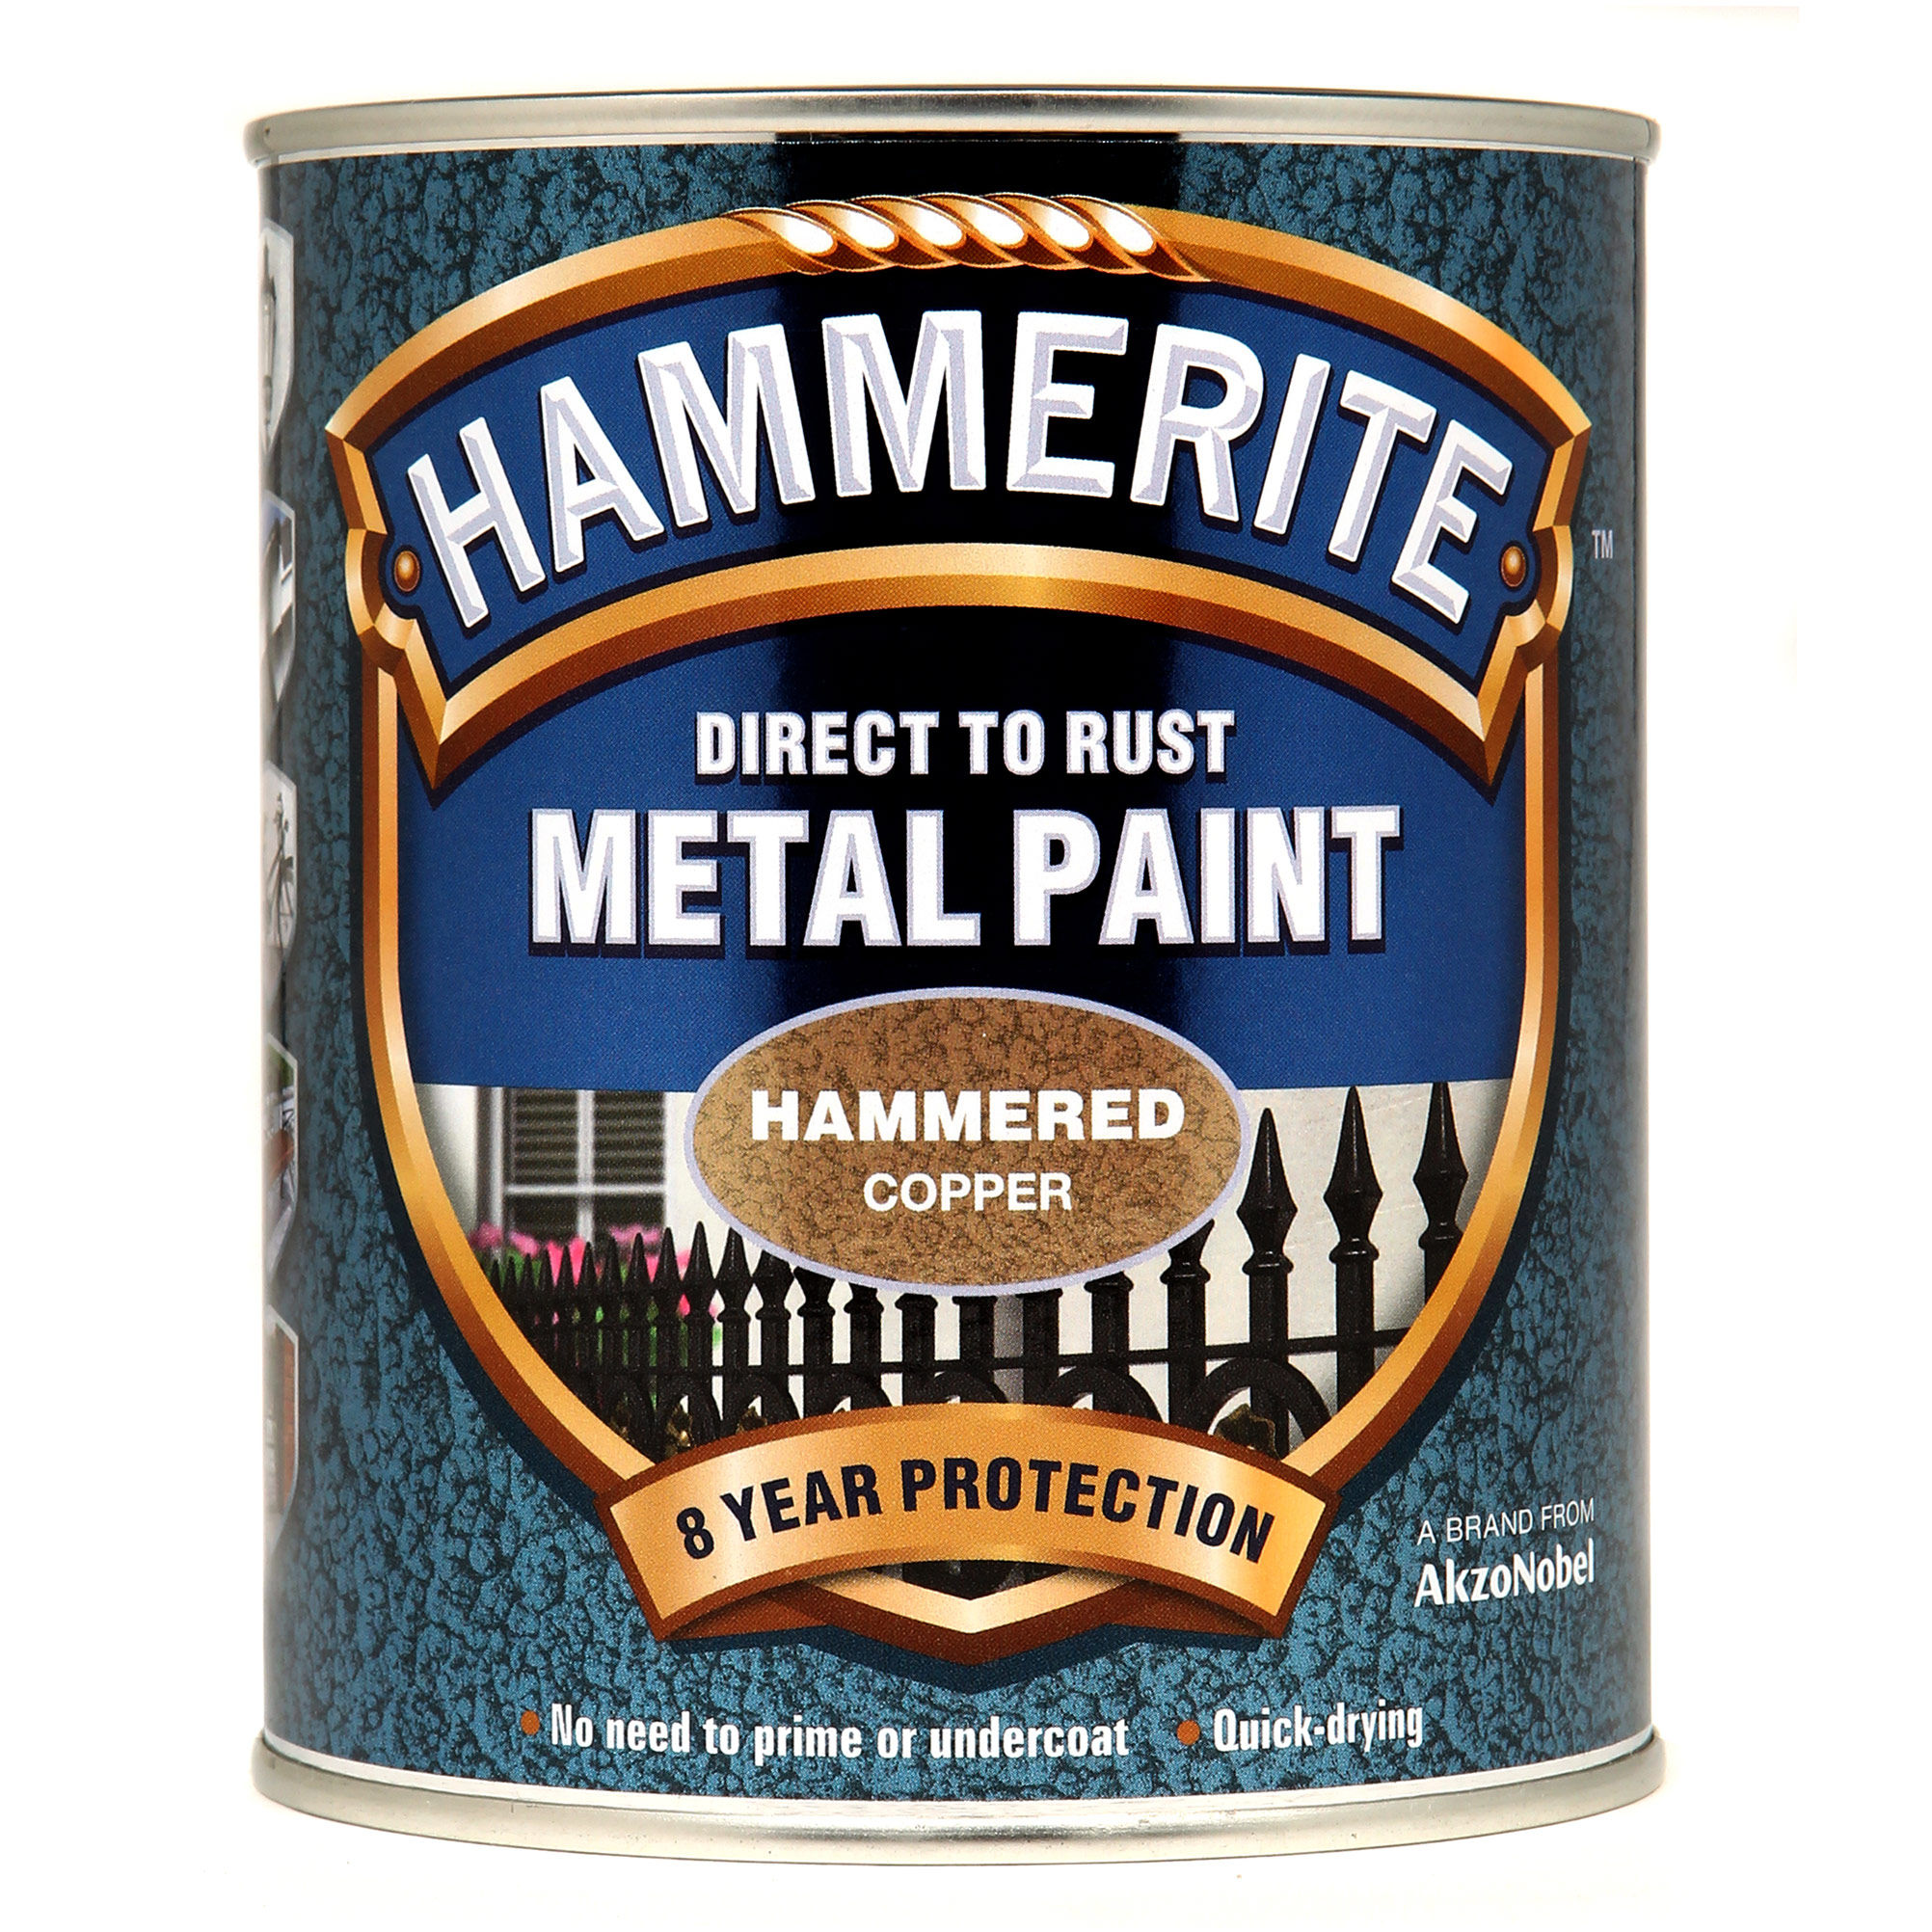 Hammerite Direct to Rust Metal Paint Hammered Finish Copper